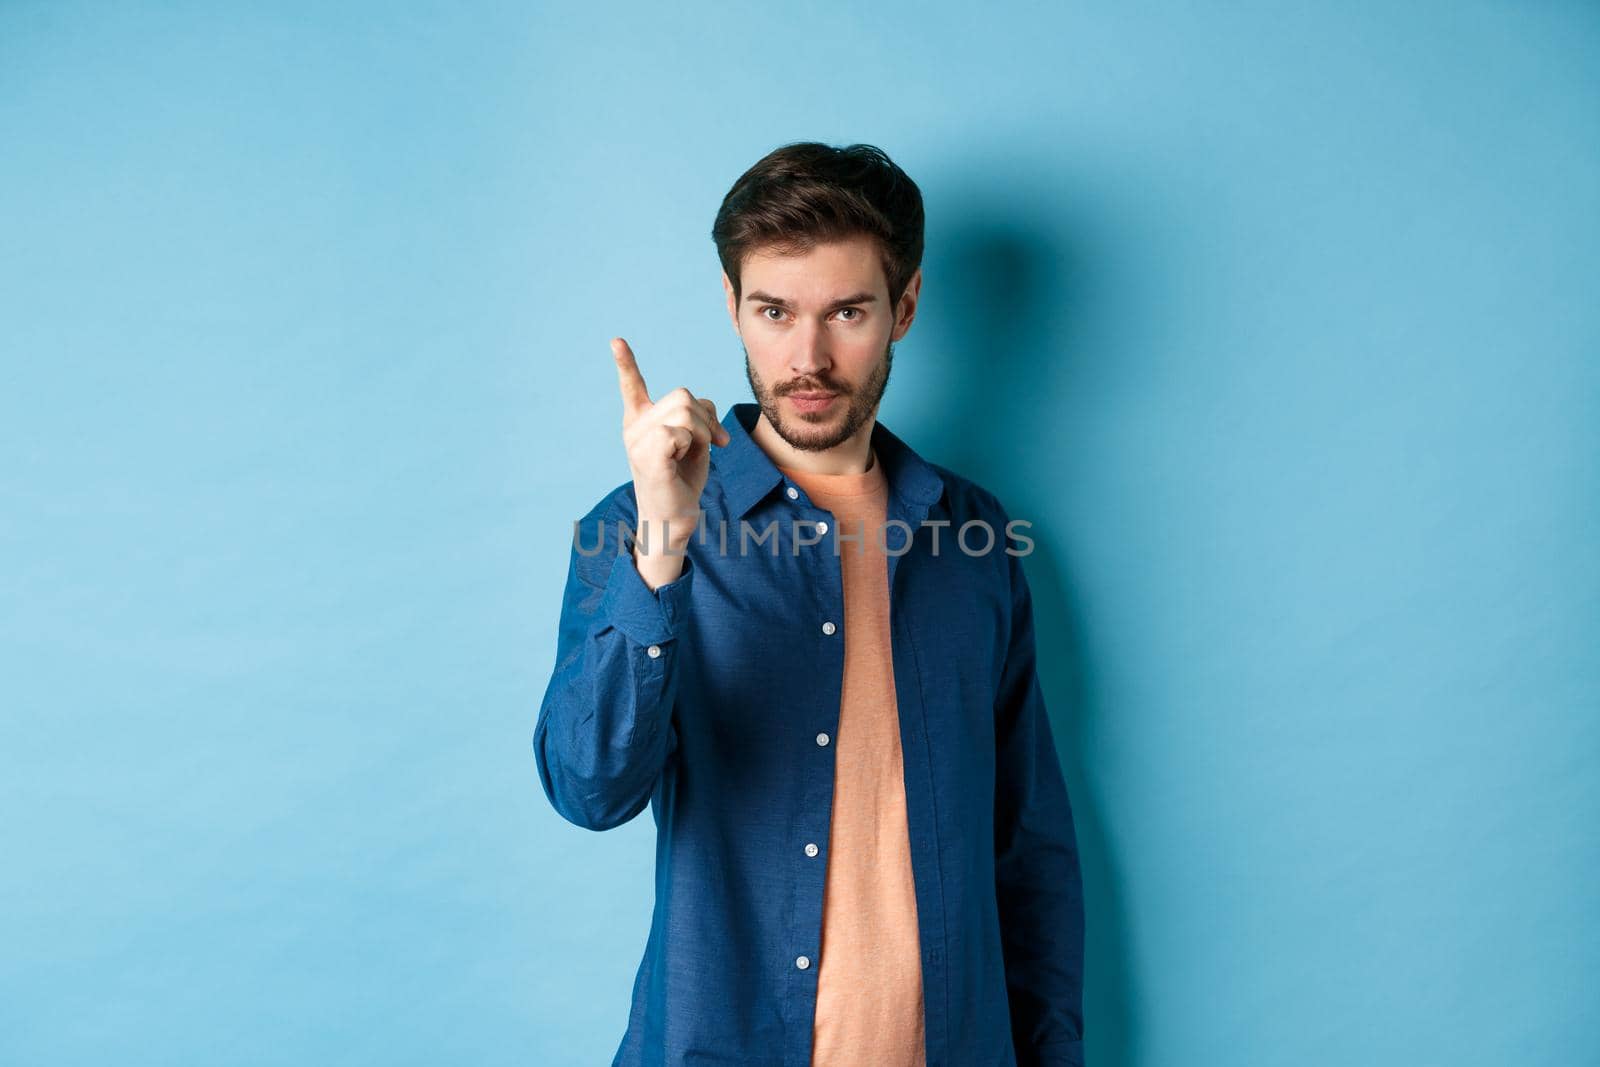 Serious young man scolding person, shaking finger disapprovingly, warn or prohibit something bad, standing on blue background.